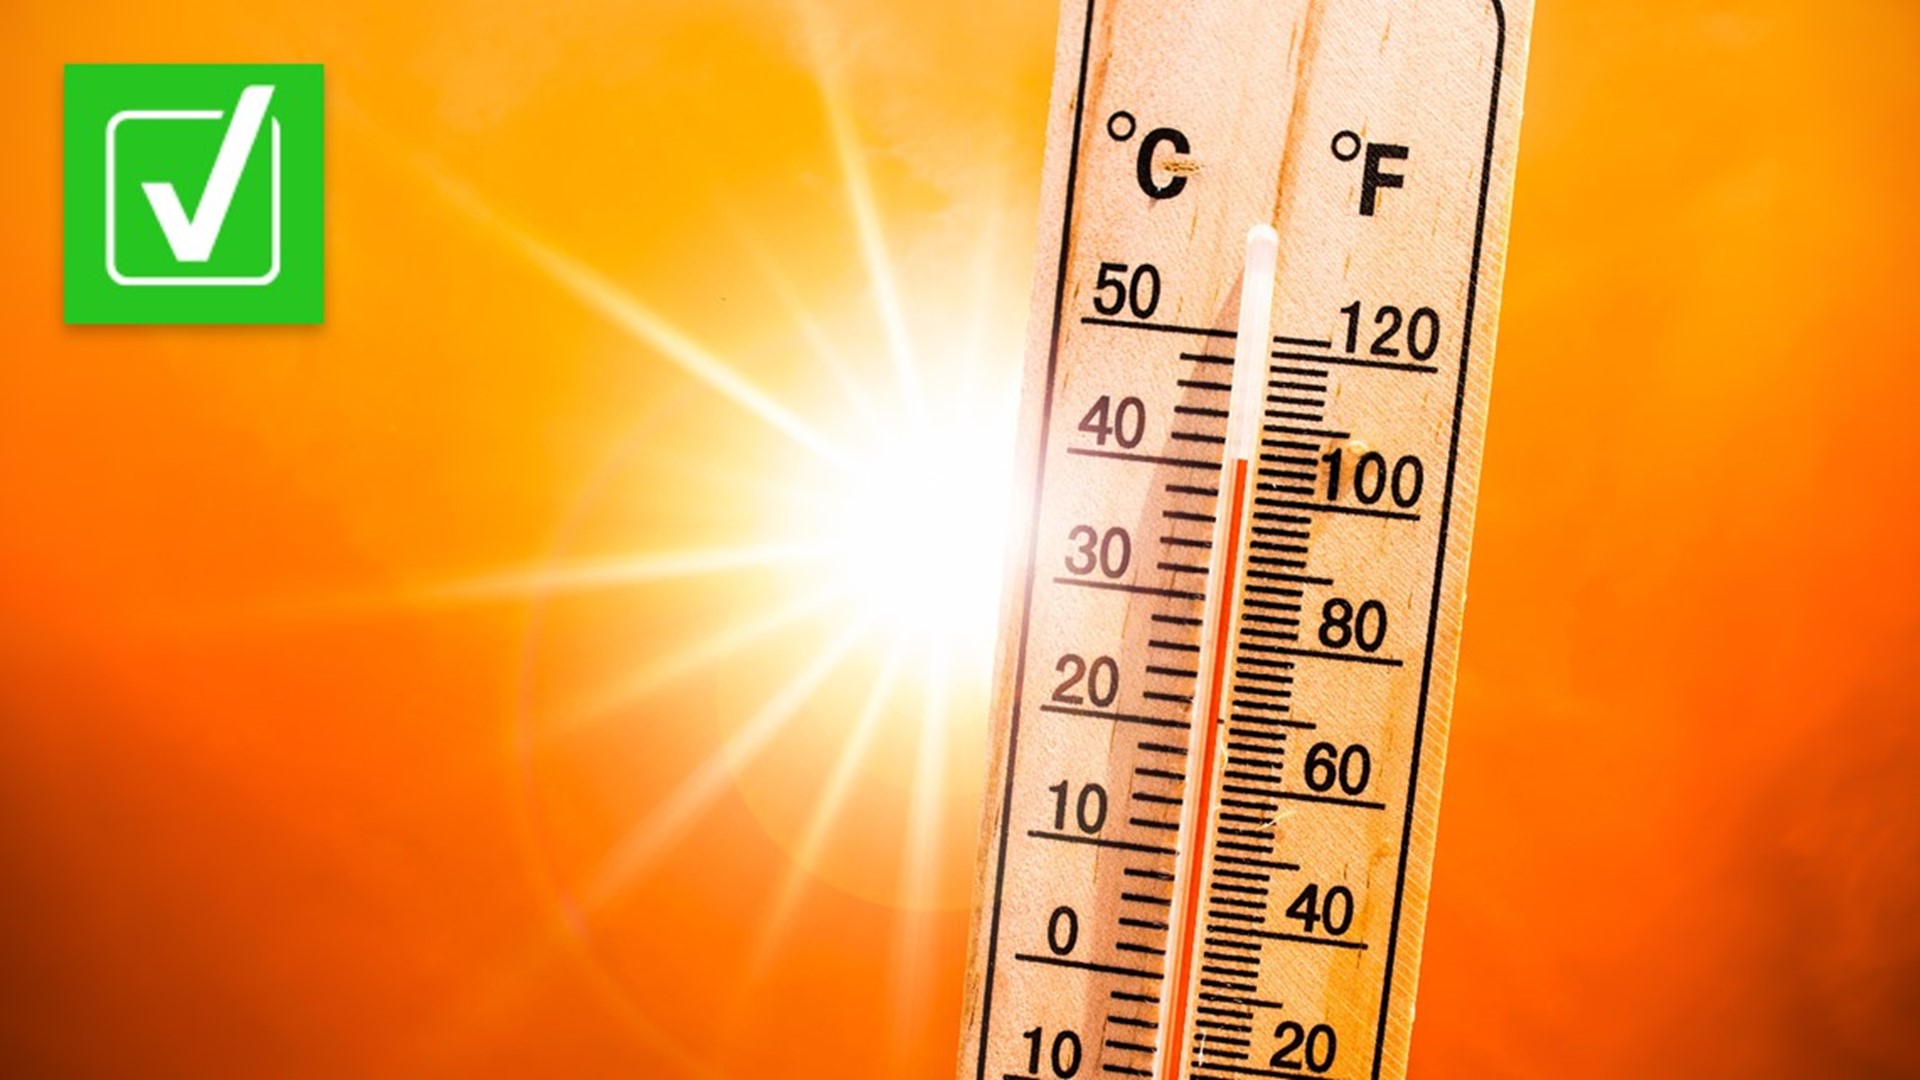 With a historic heat wave in the Pacific Northwest, some people have pointed out how deadly intensifying summer temperatures can be.